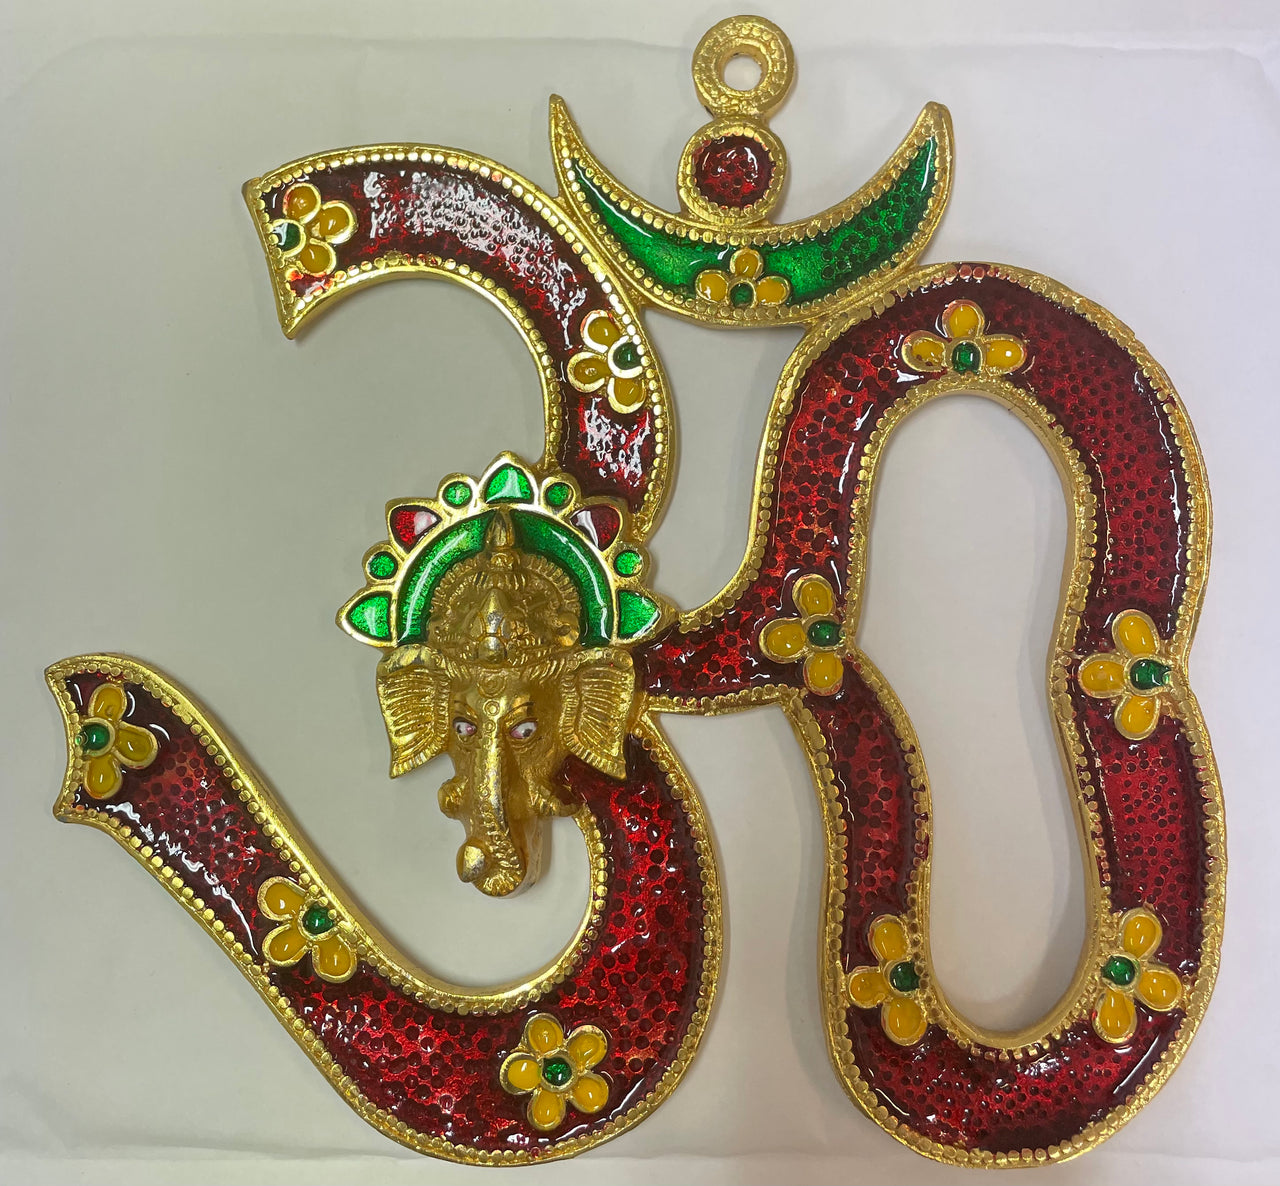 Metal Wall Hanging Om Shaped with Ganesha Figurine Multicolours, 9x8.5 Inch, 1 Pcs